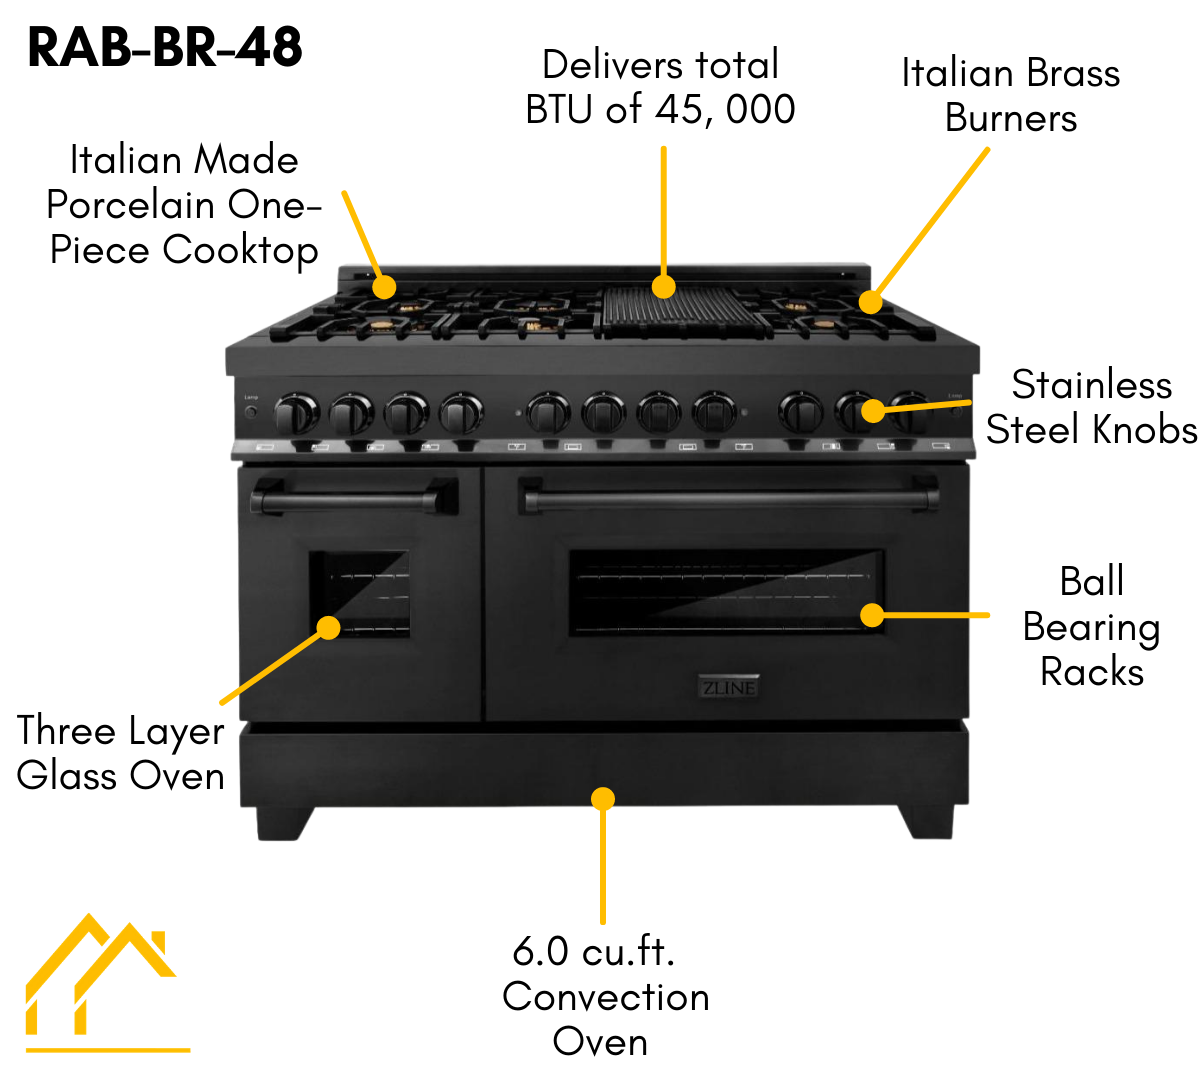 ZLINE 48" Kitchen Package with Black Stainless Steel Dual Fuel Range, Convertible Vent Range Hood and 24" Microwave Oven